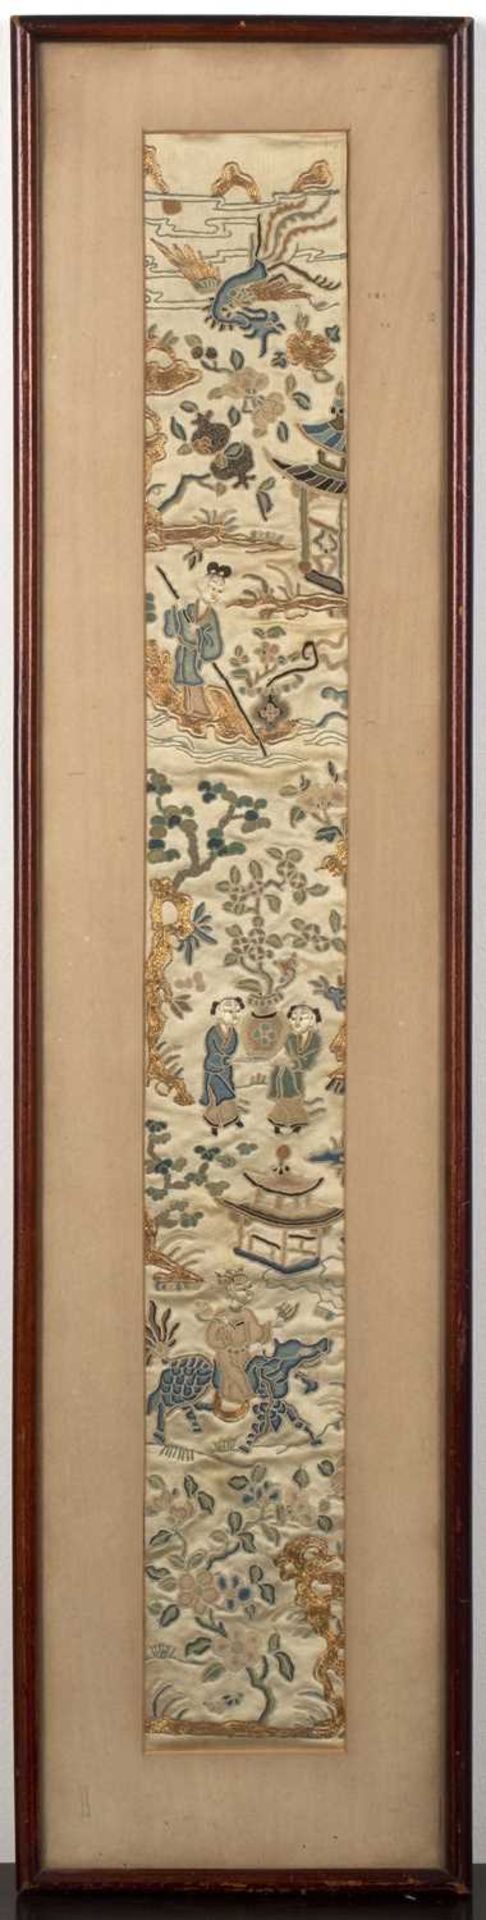 Kesi silk sleeve panel Chinese, late 19th/early 20th Century depicting various figures in coloured - Image 5 of 6